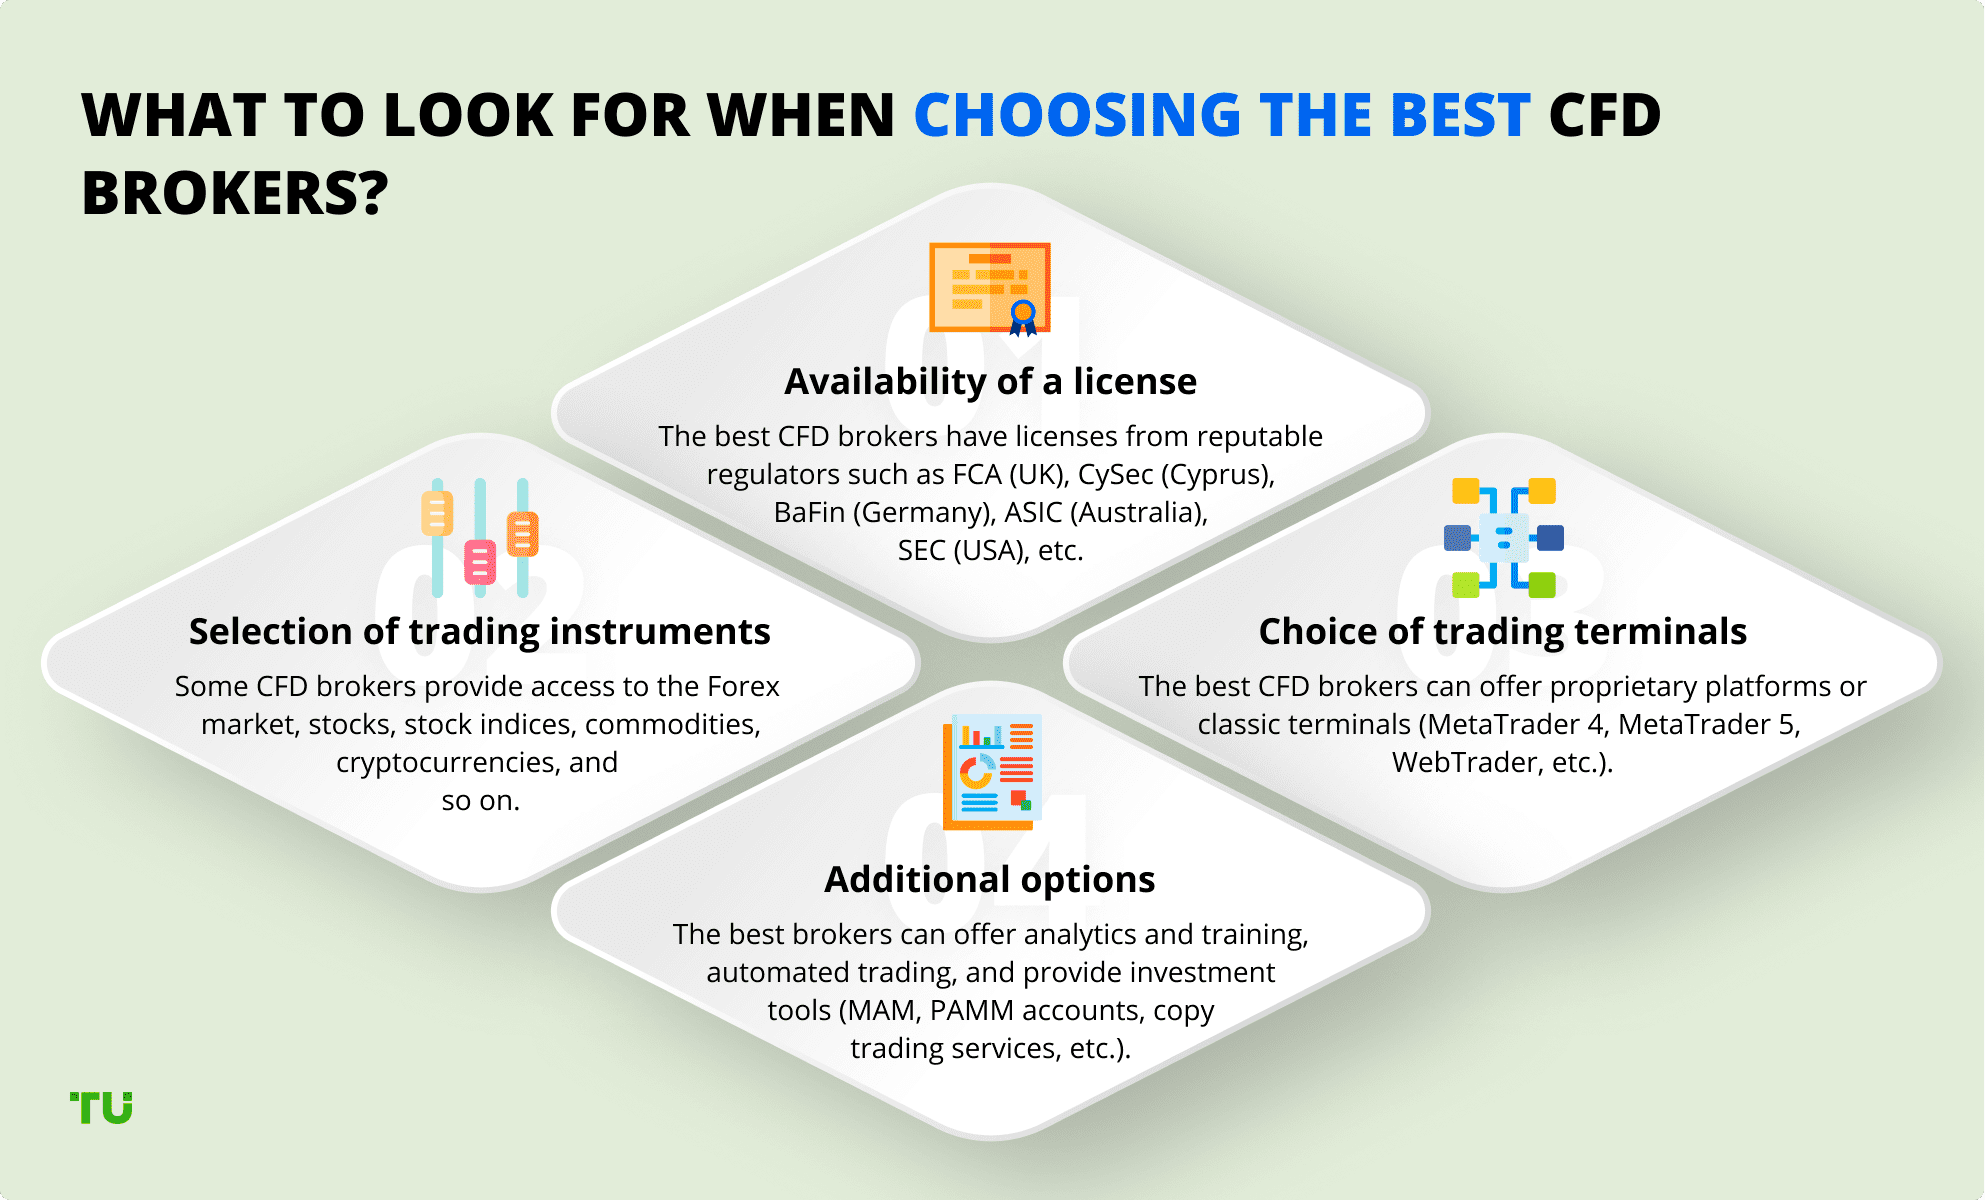 What to look for when choosing the best CFD brokers?